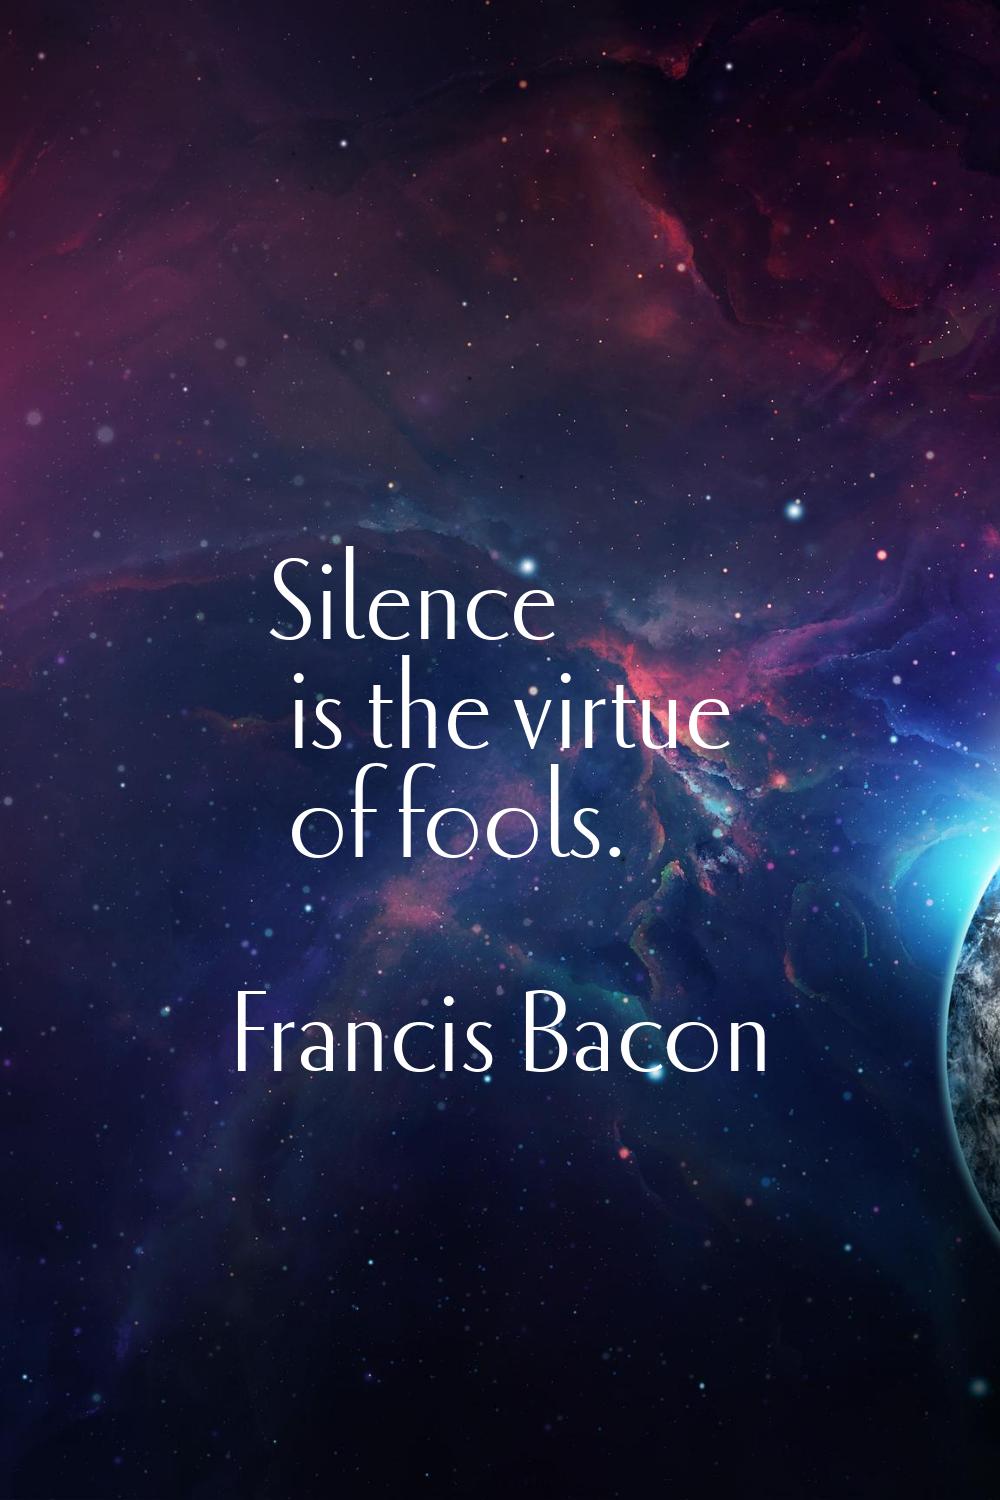 Silence is the virtue of fools.